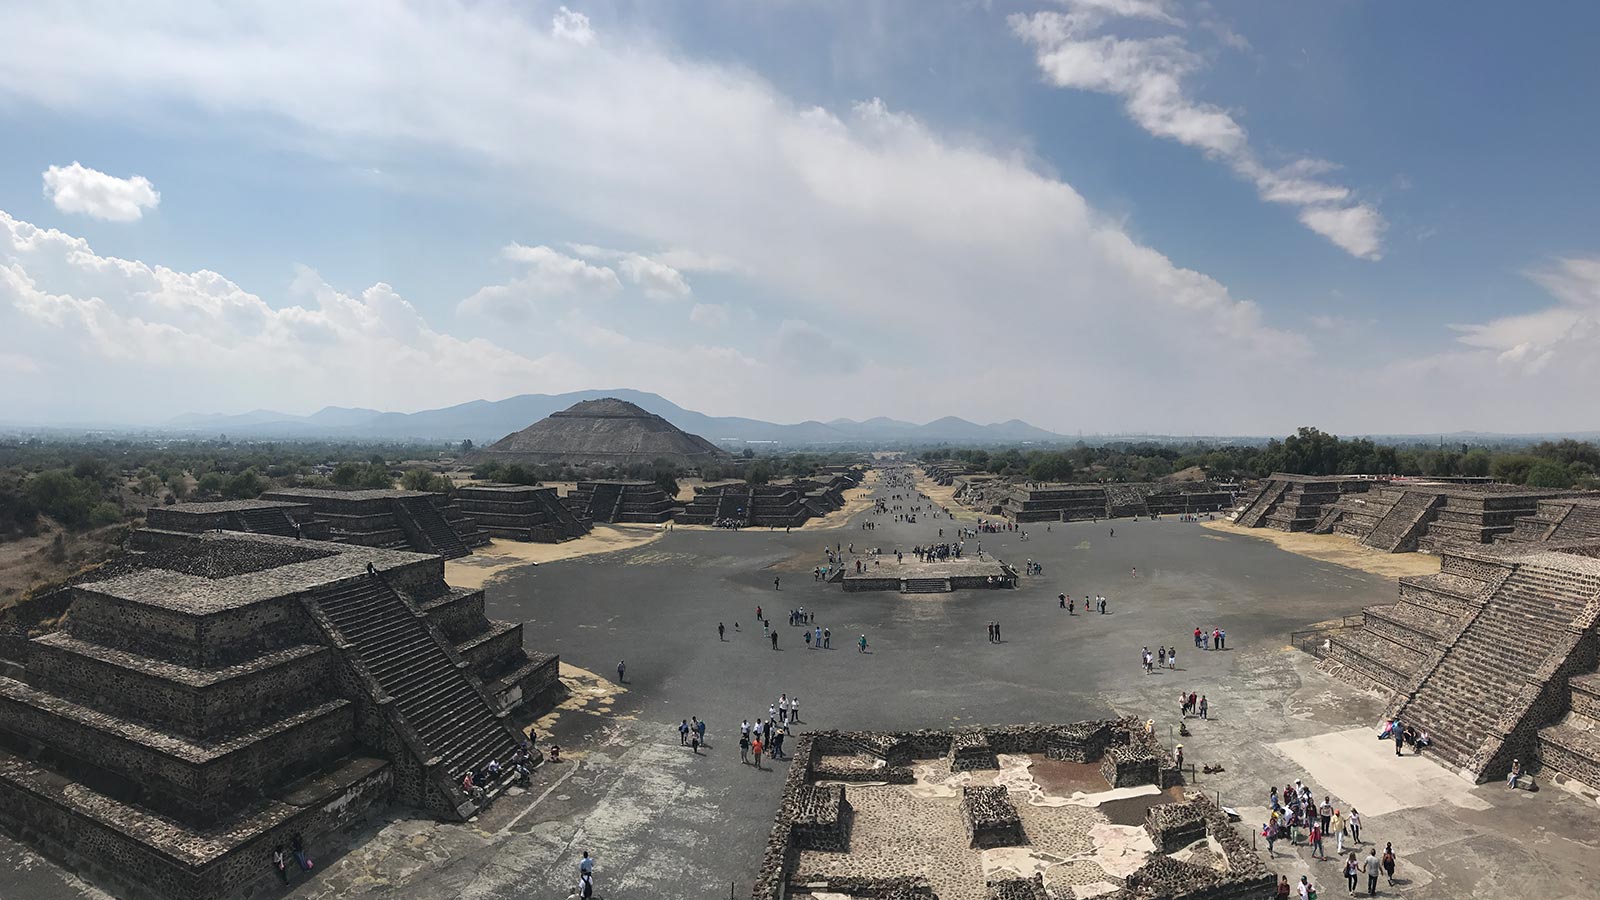 Temples, pyramids and plazas with its visitors in Teotihuacan, Mexico. Mexico City & Teotihuacan